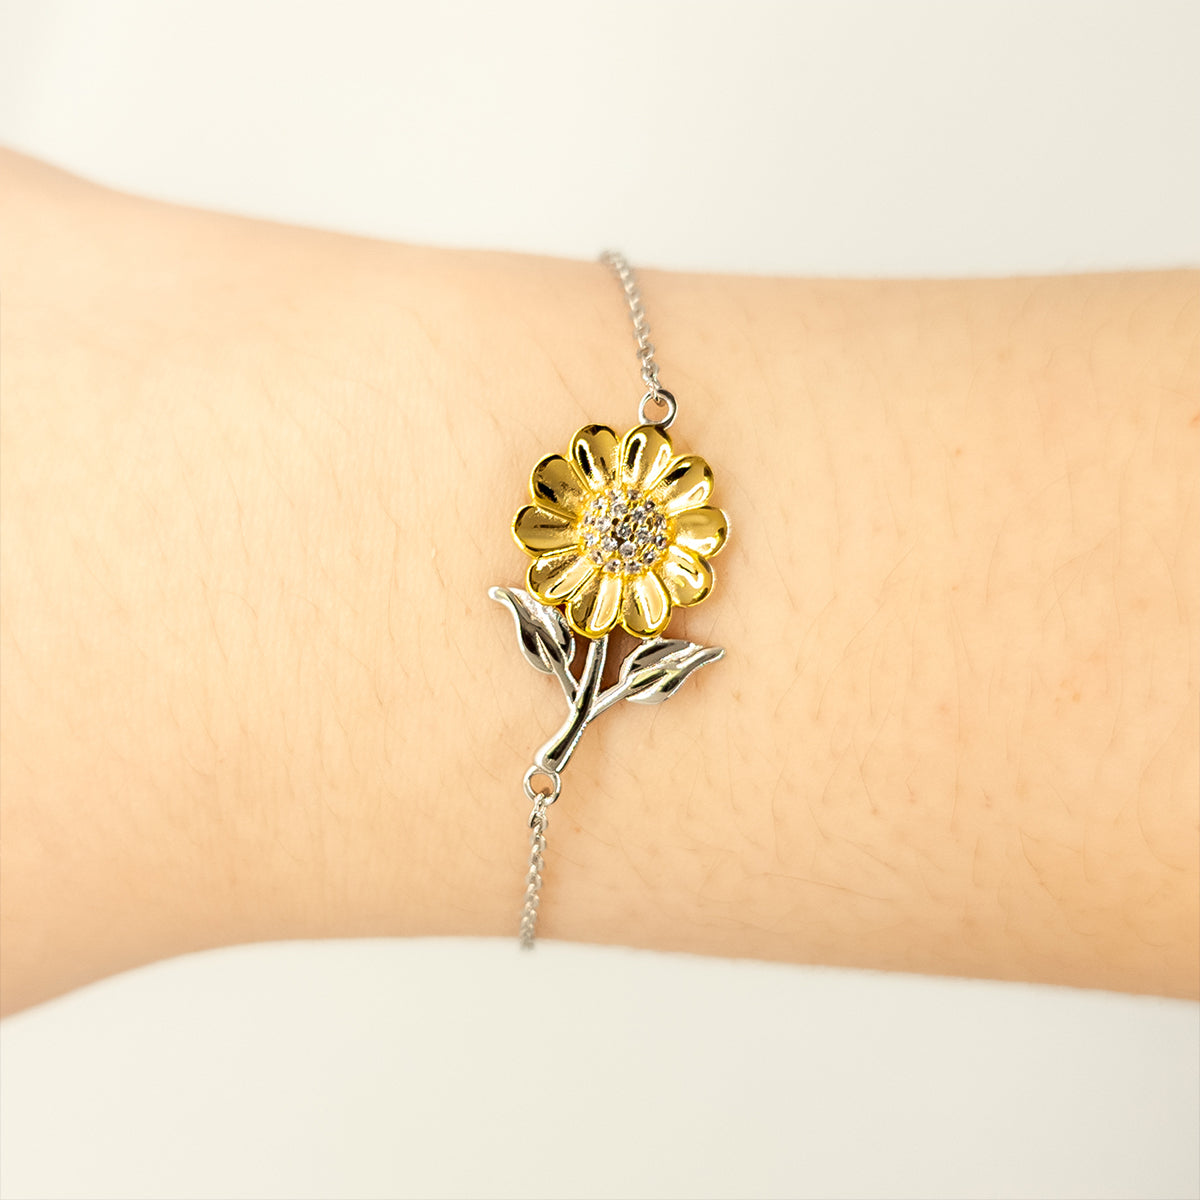 Godmom Sunflower Bracelet - Keepsake Gift for Special Godmom, Engraved with Hope and Love, Perfect for Birthday, Christmas, Graduation, and More